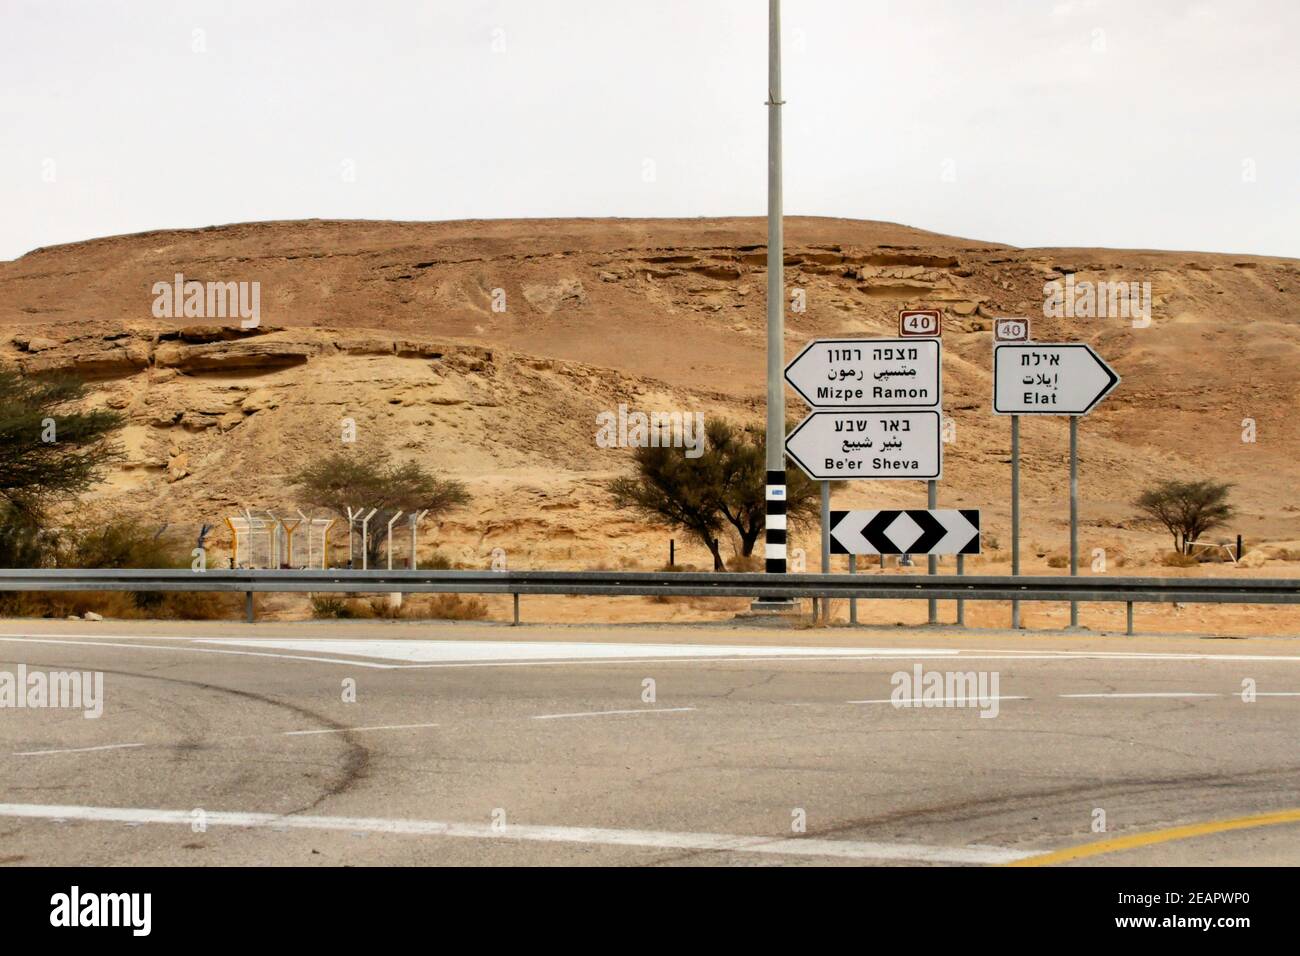 The intersection of Highway 12 and Highway 40 in the southern Negev Desert, just north of Eilat and the Red Sea in Israel. Stock Photo